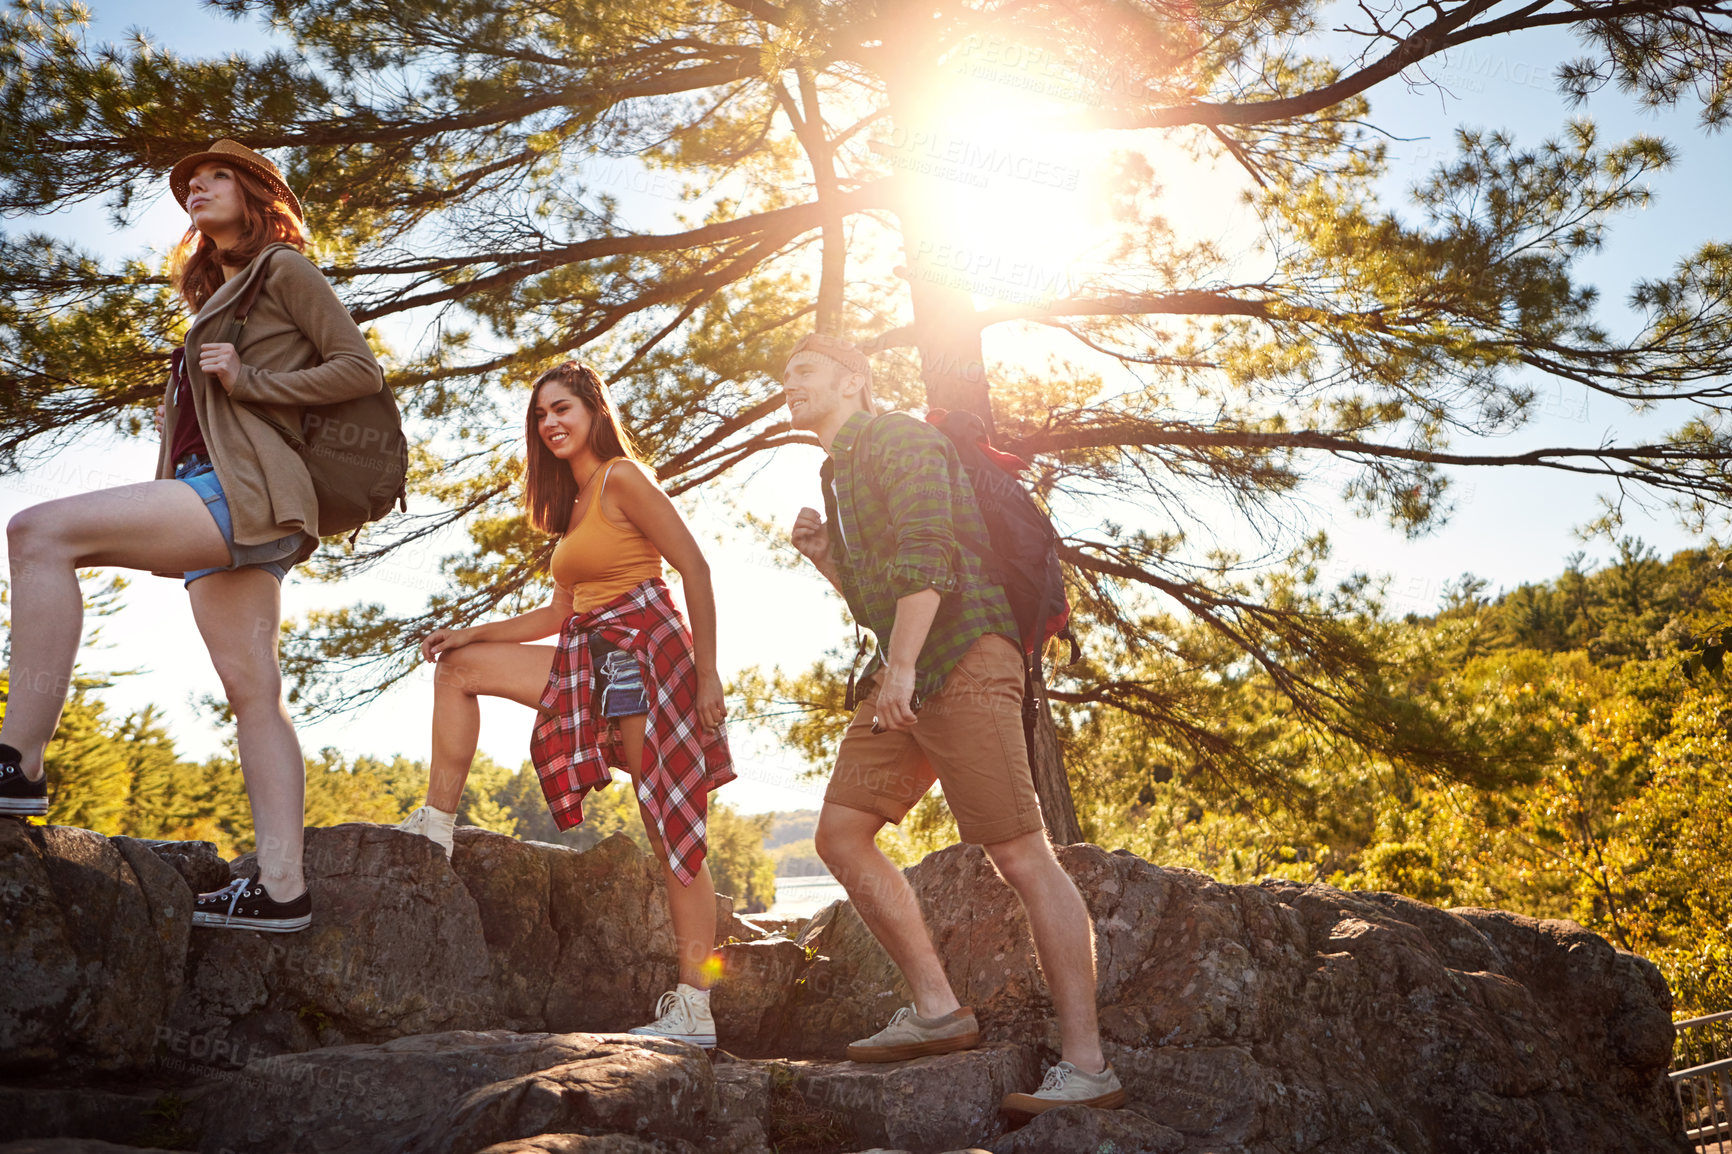 Buy stock photo Shot of three friends out hiking in the mountains